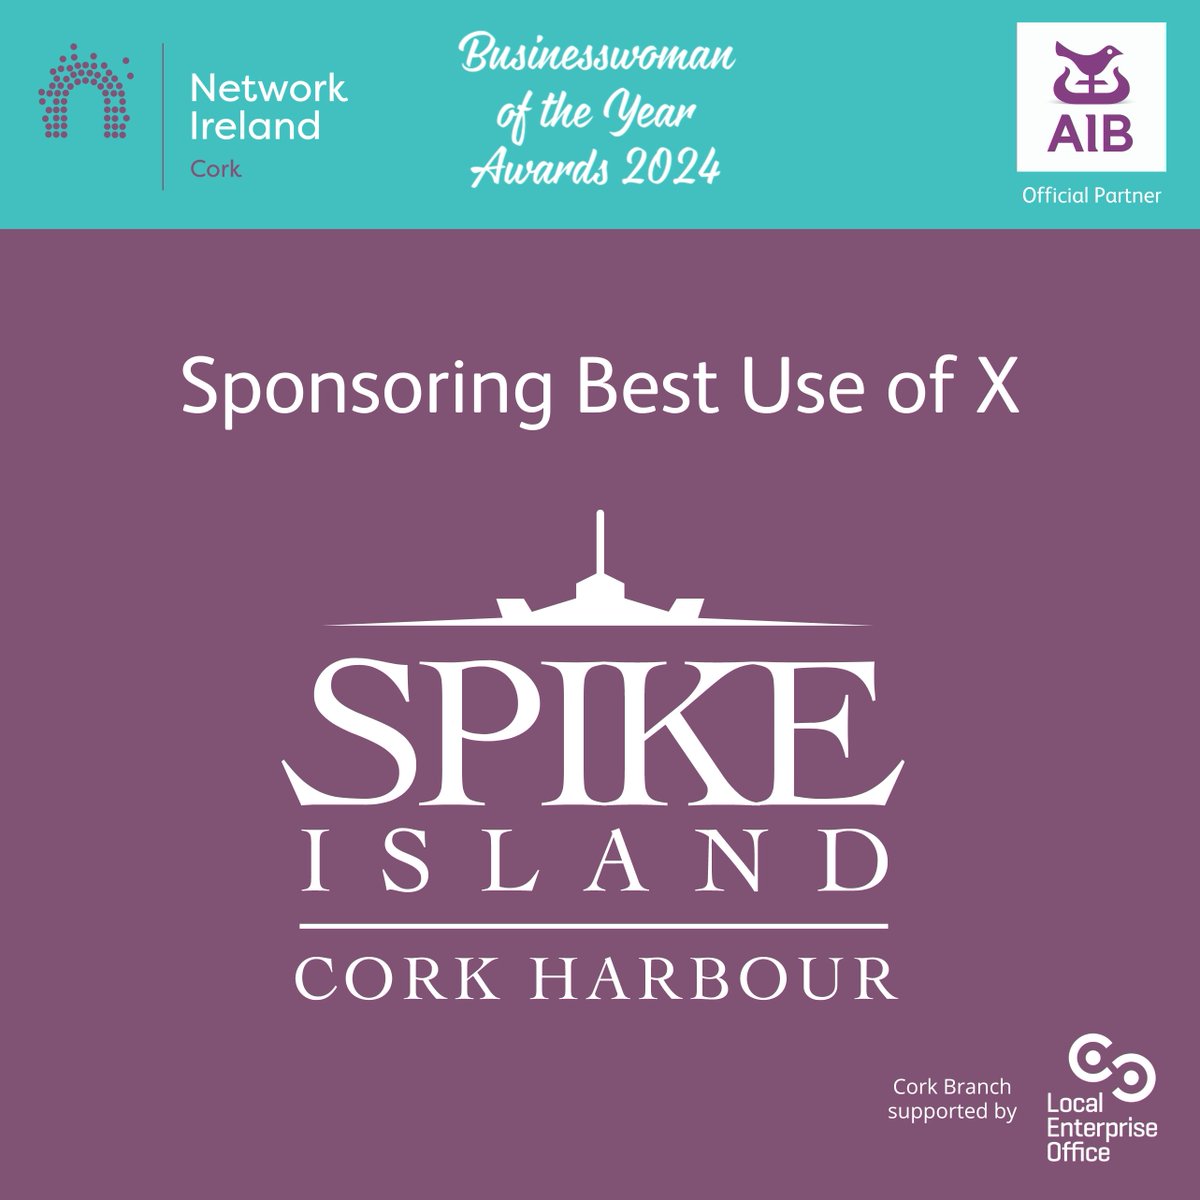 Big thank you to our sponsor, Spike Island, Cork Harbour, for sponsoring the Best Use of X award! Don’t miss out! 🎟️ Ticket sales close this Sunday, the 19th. 🔗 Book now: bit.ly/44hfBkv #NetworkIreland #NetworkCork #supportedbyAIB #AStepAhead